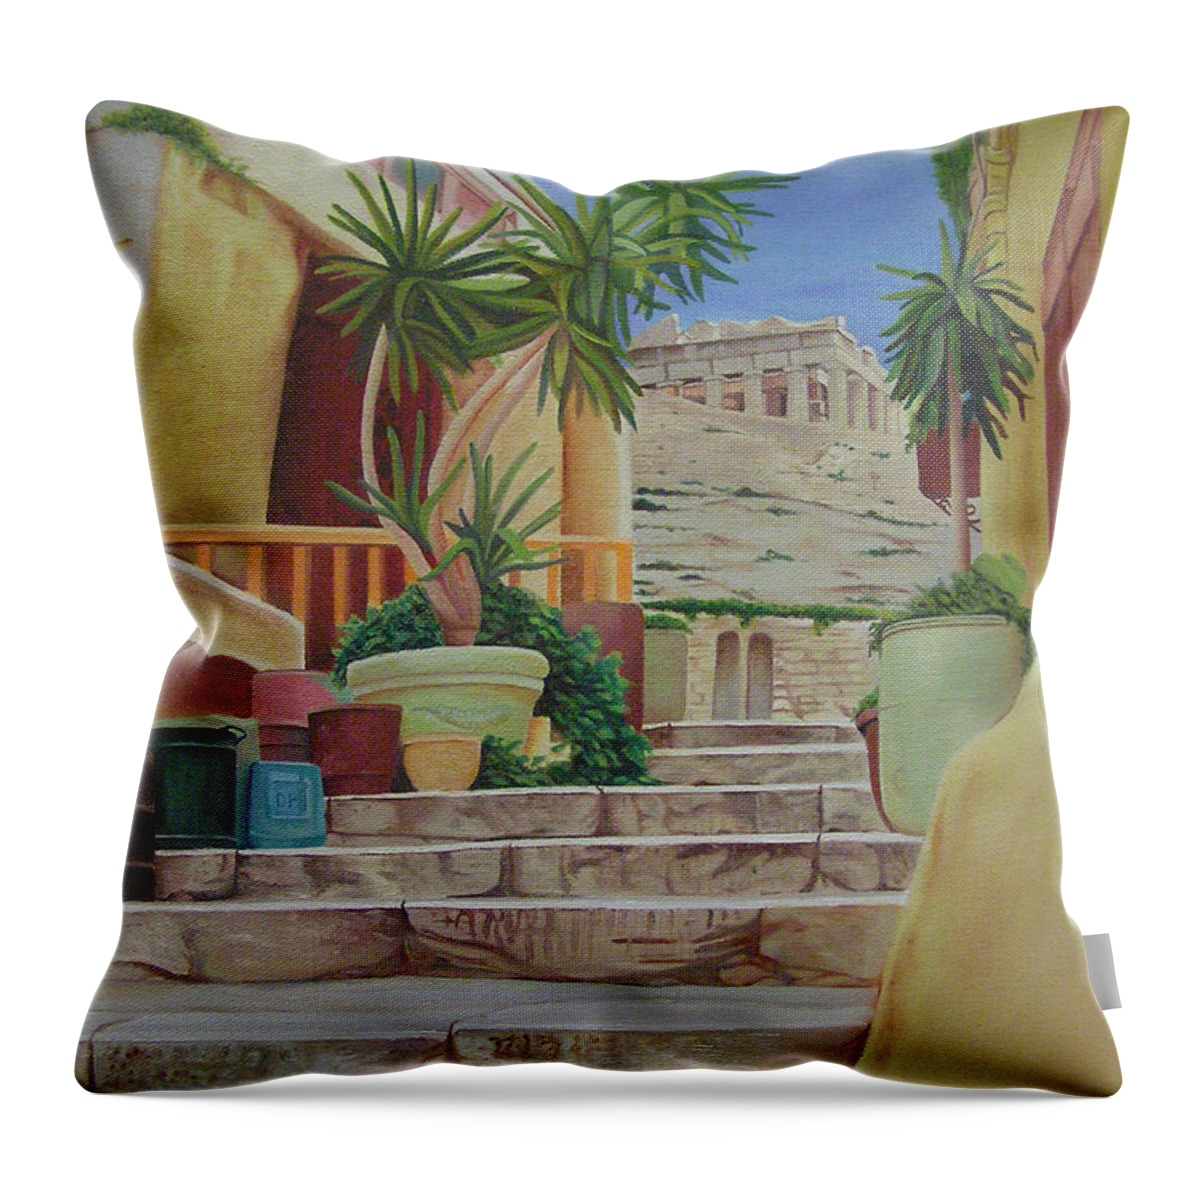 Greece Throw Pillow featuring the painting Greece by Joshua Morton